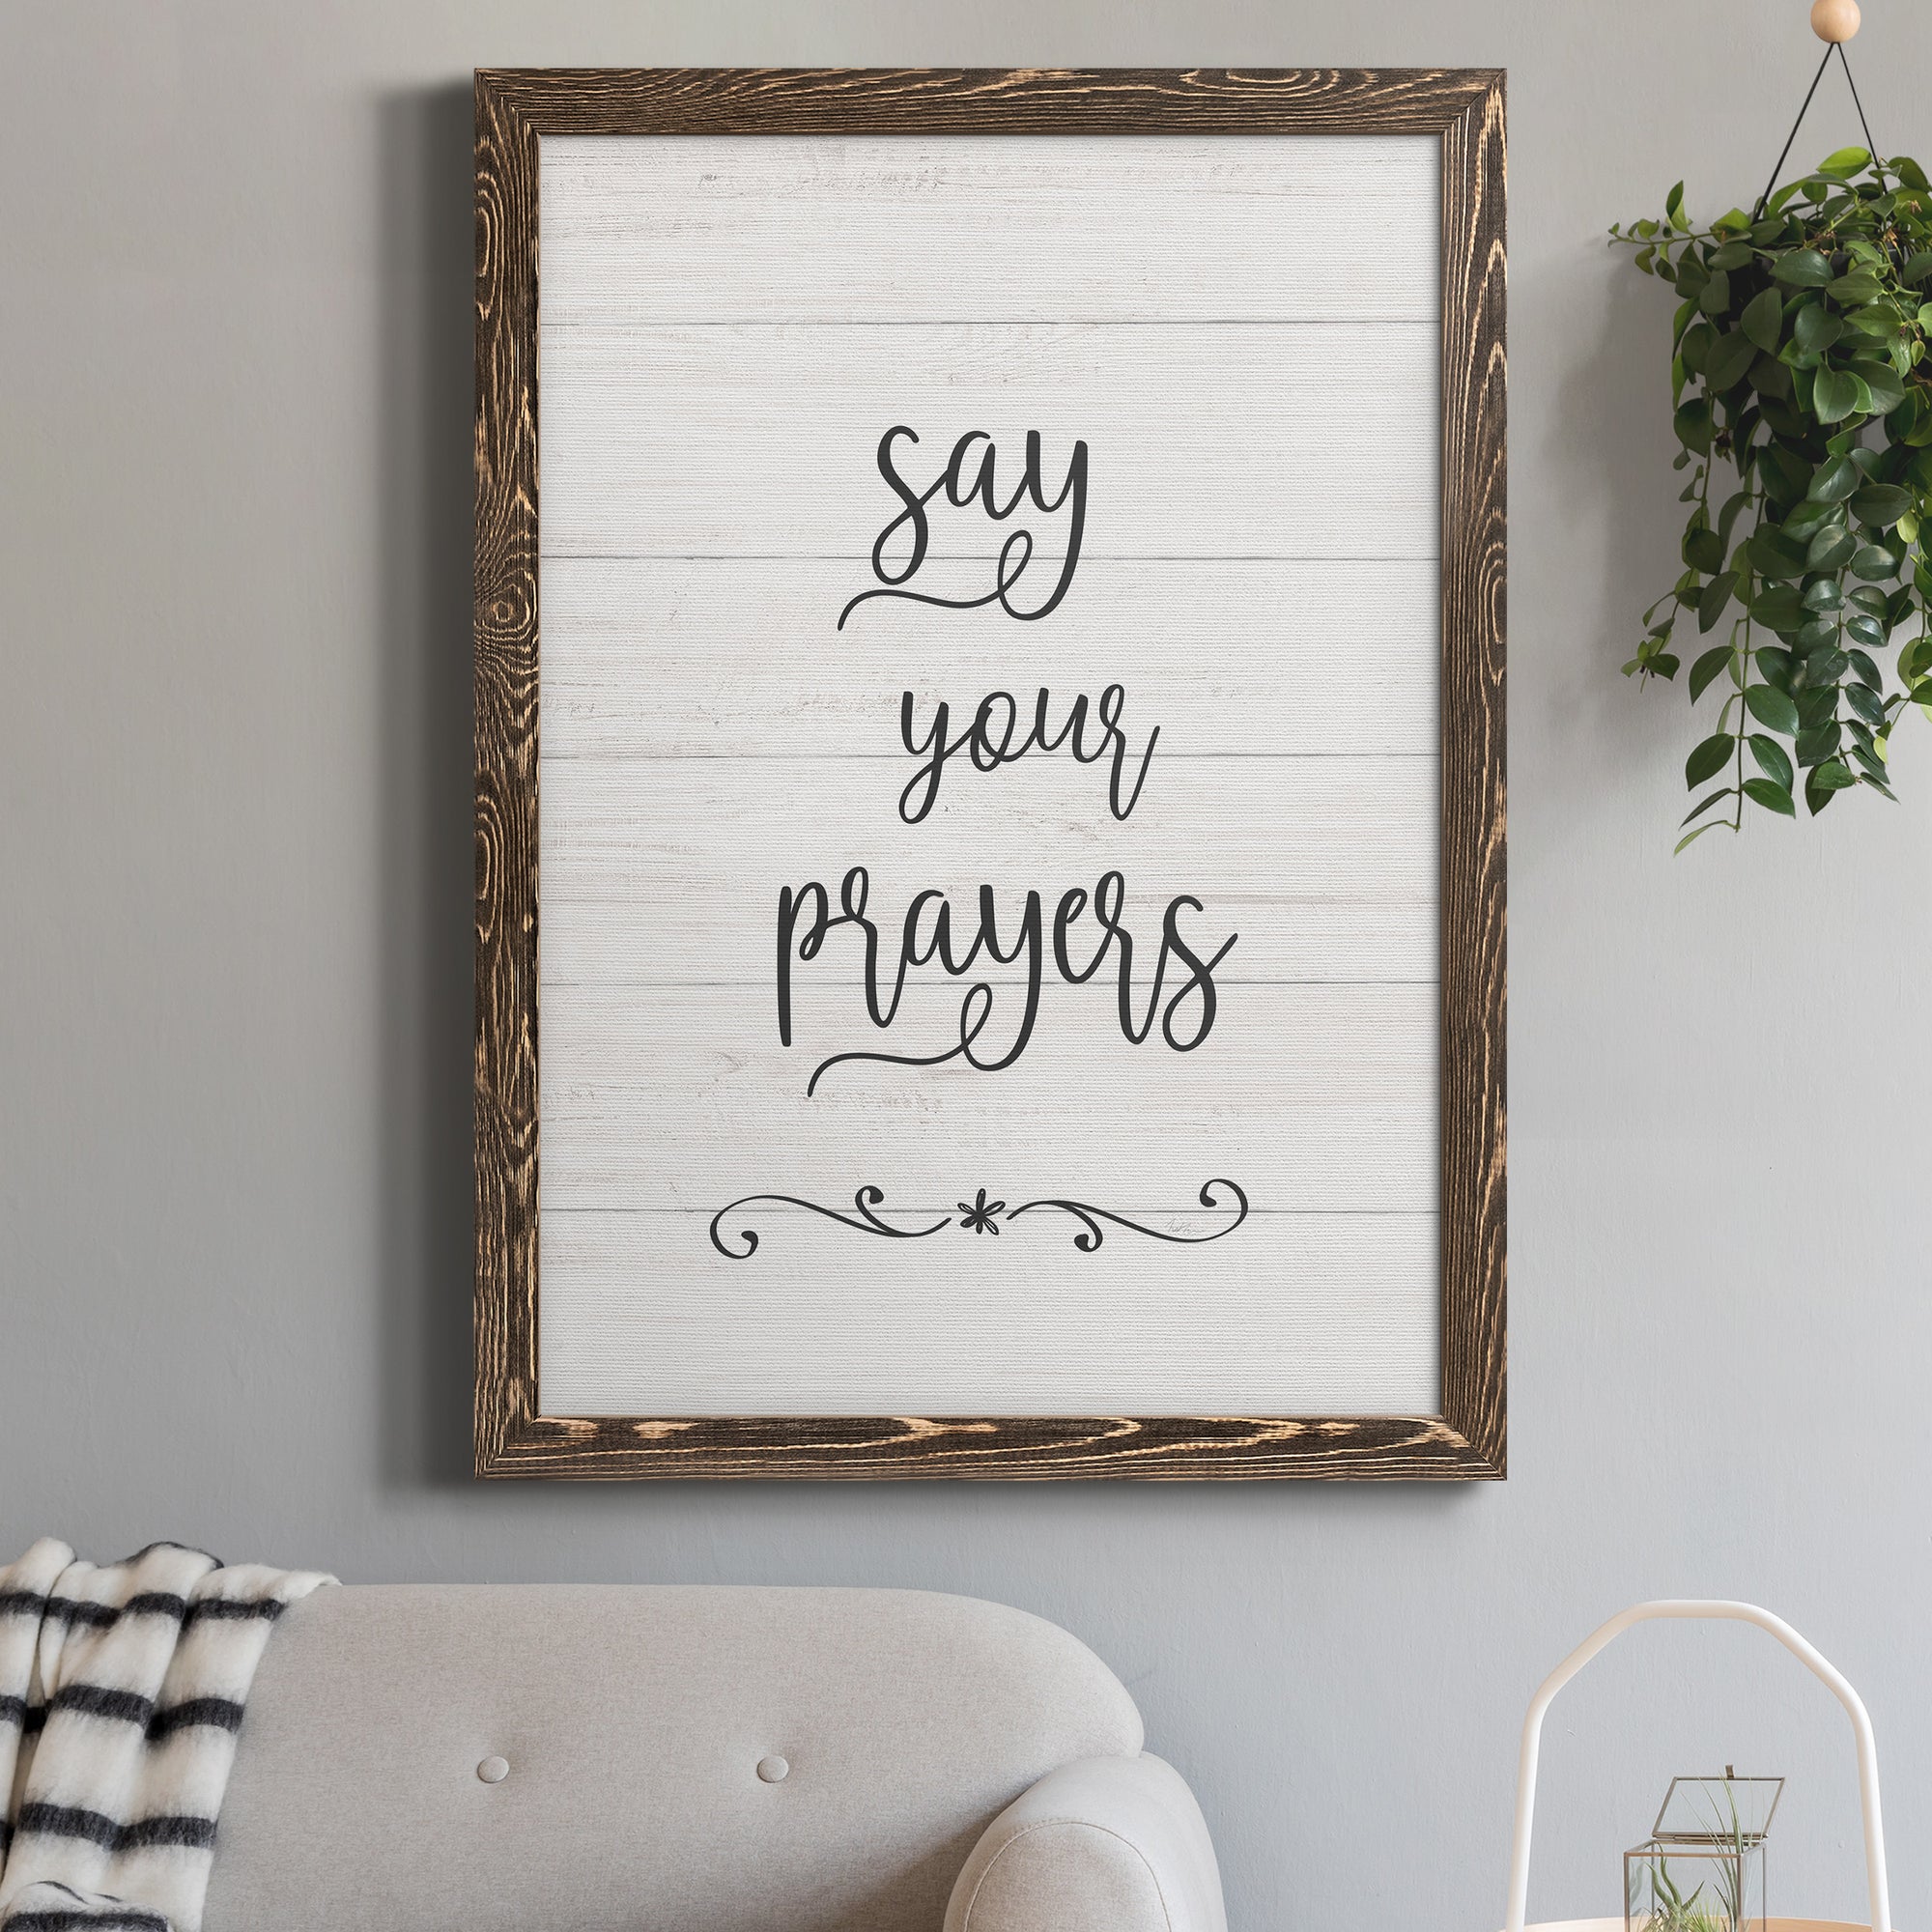 Say Your Prayers - Premium Canvas Framed in Barnwood - Ready to Hang